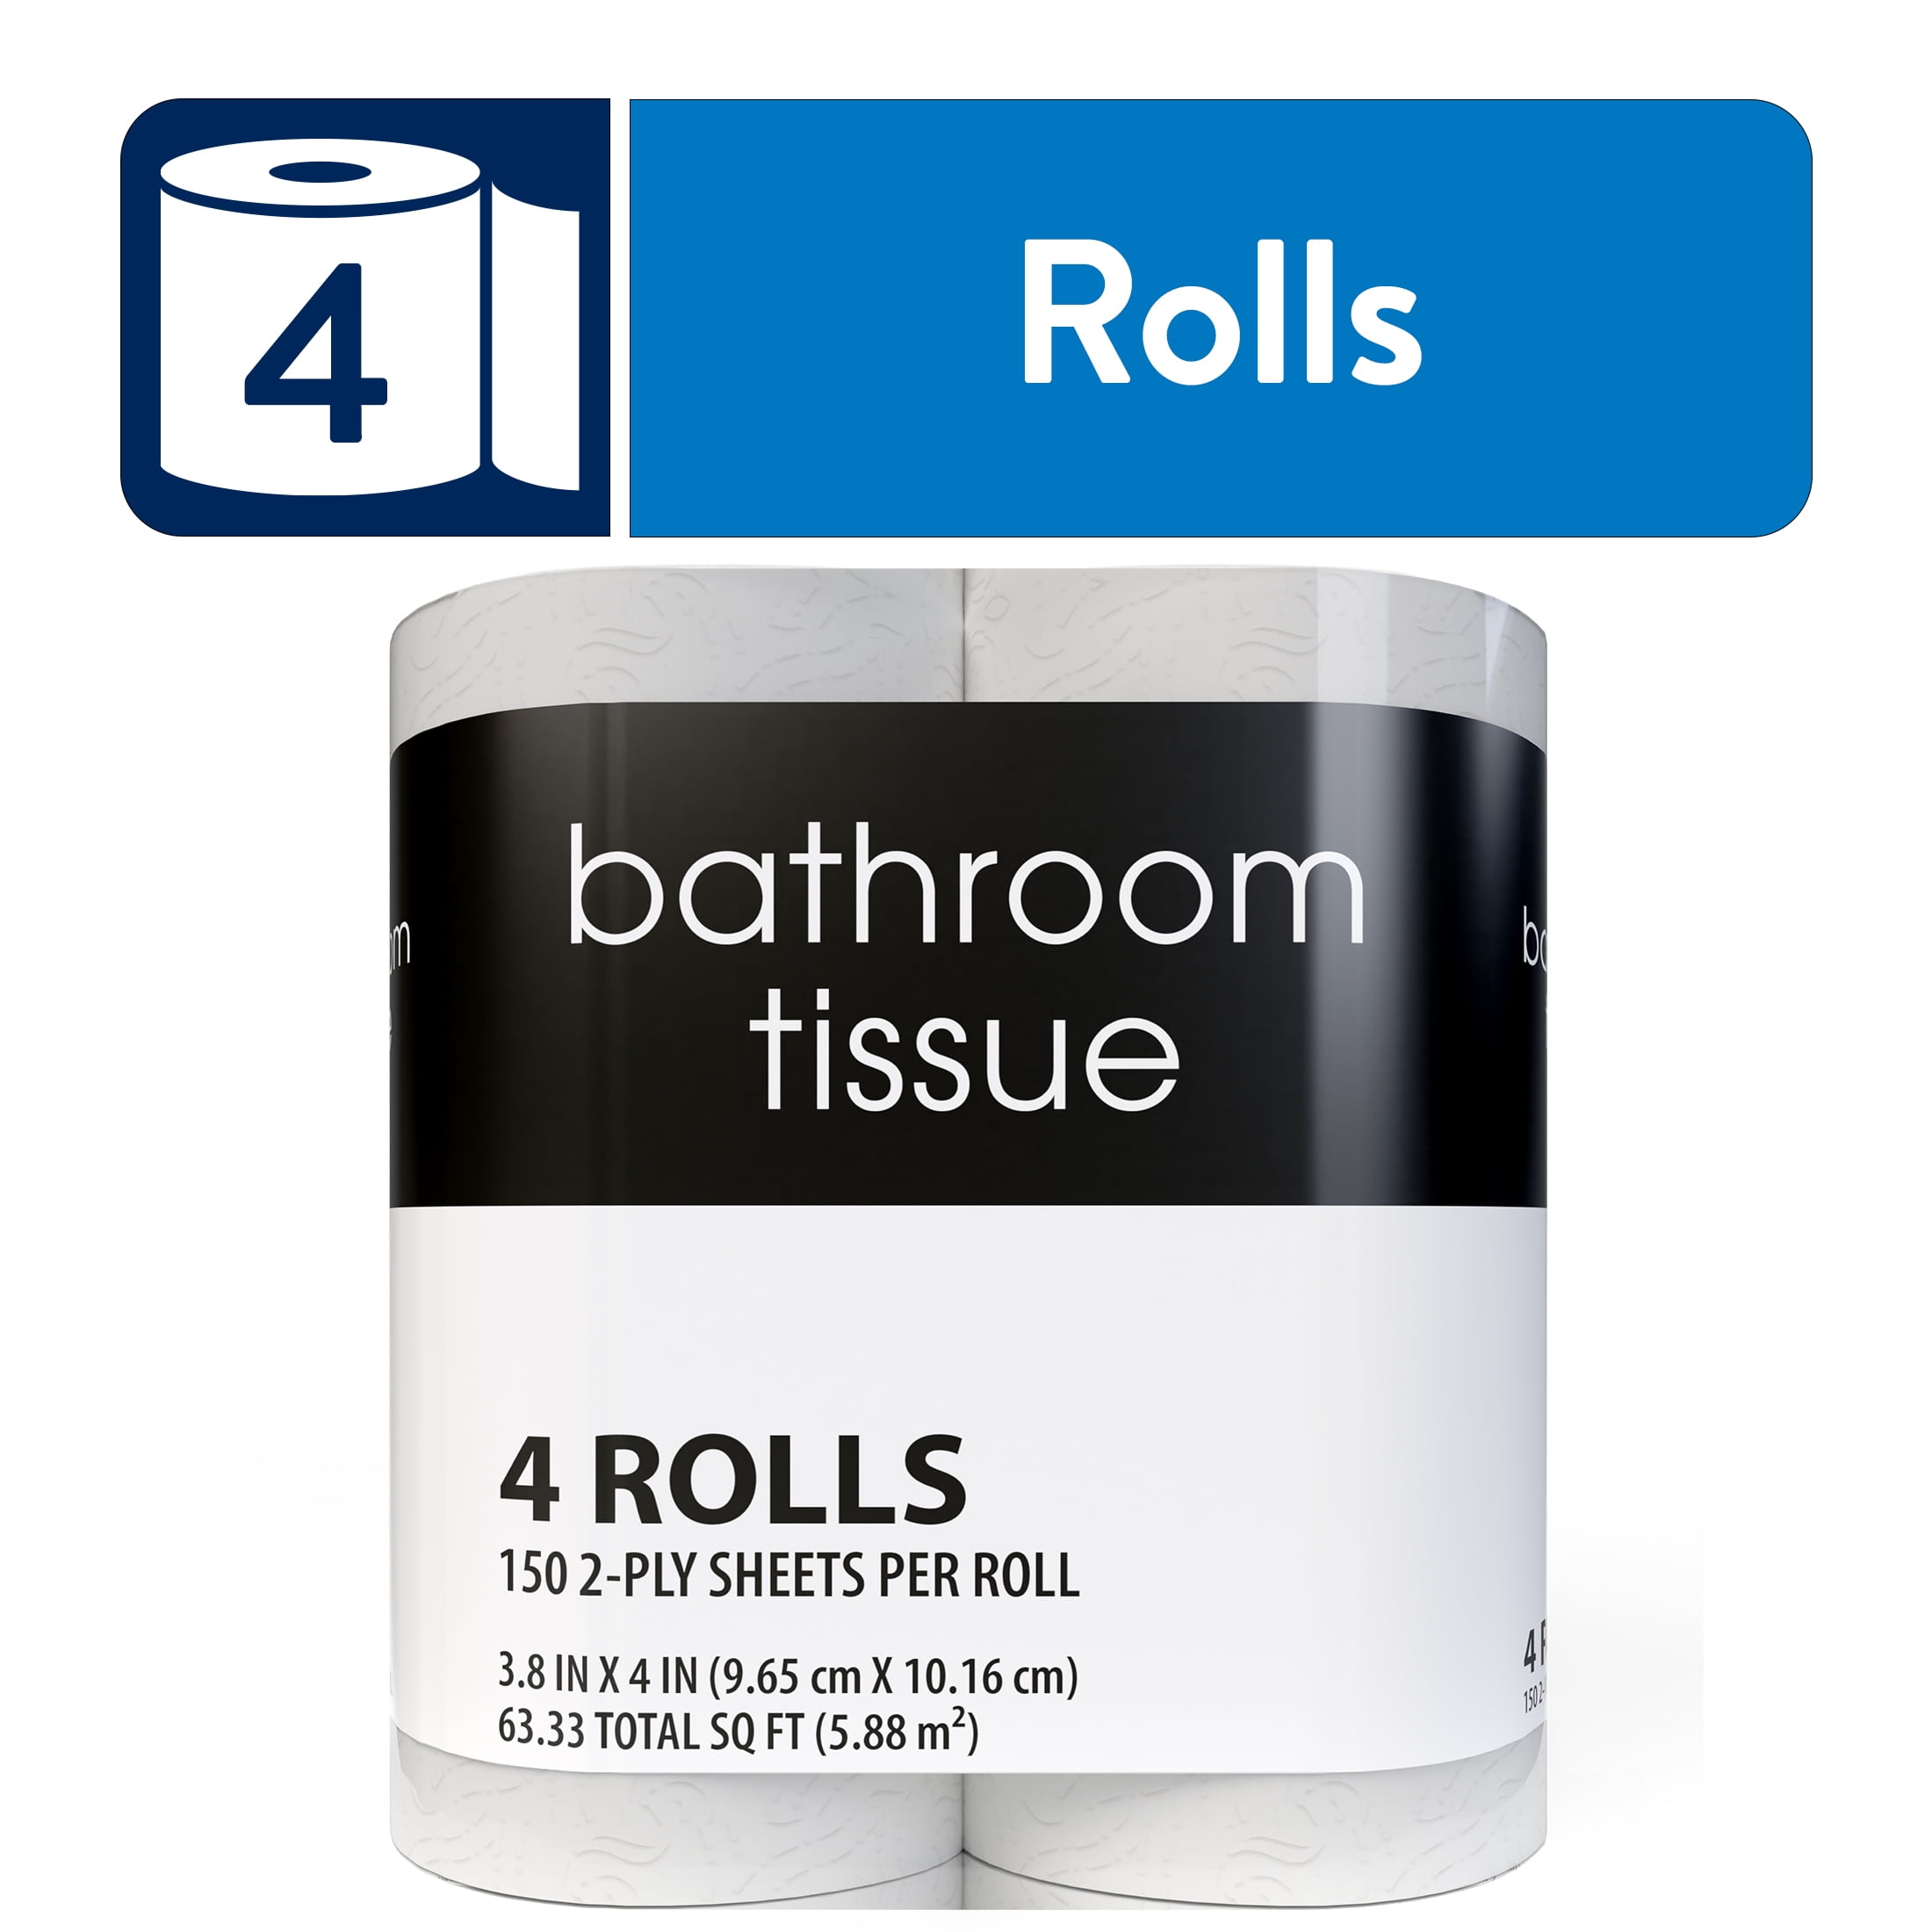 150 2-Ply Sheets per Roll Toilet Paper, 4 Rolls